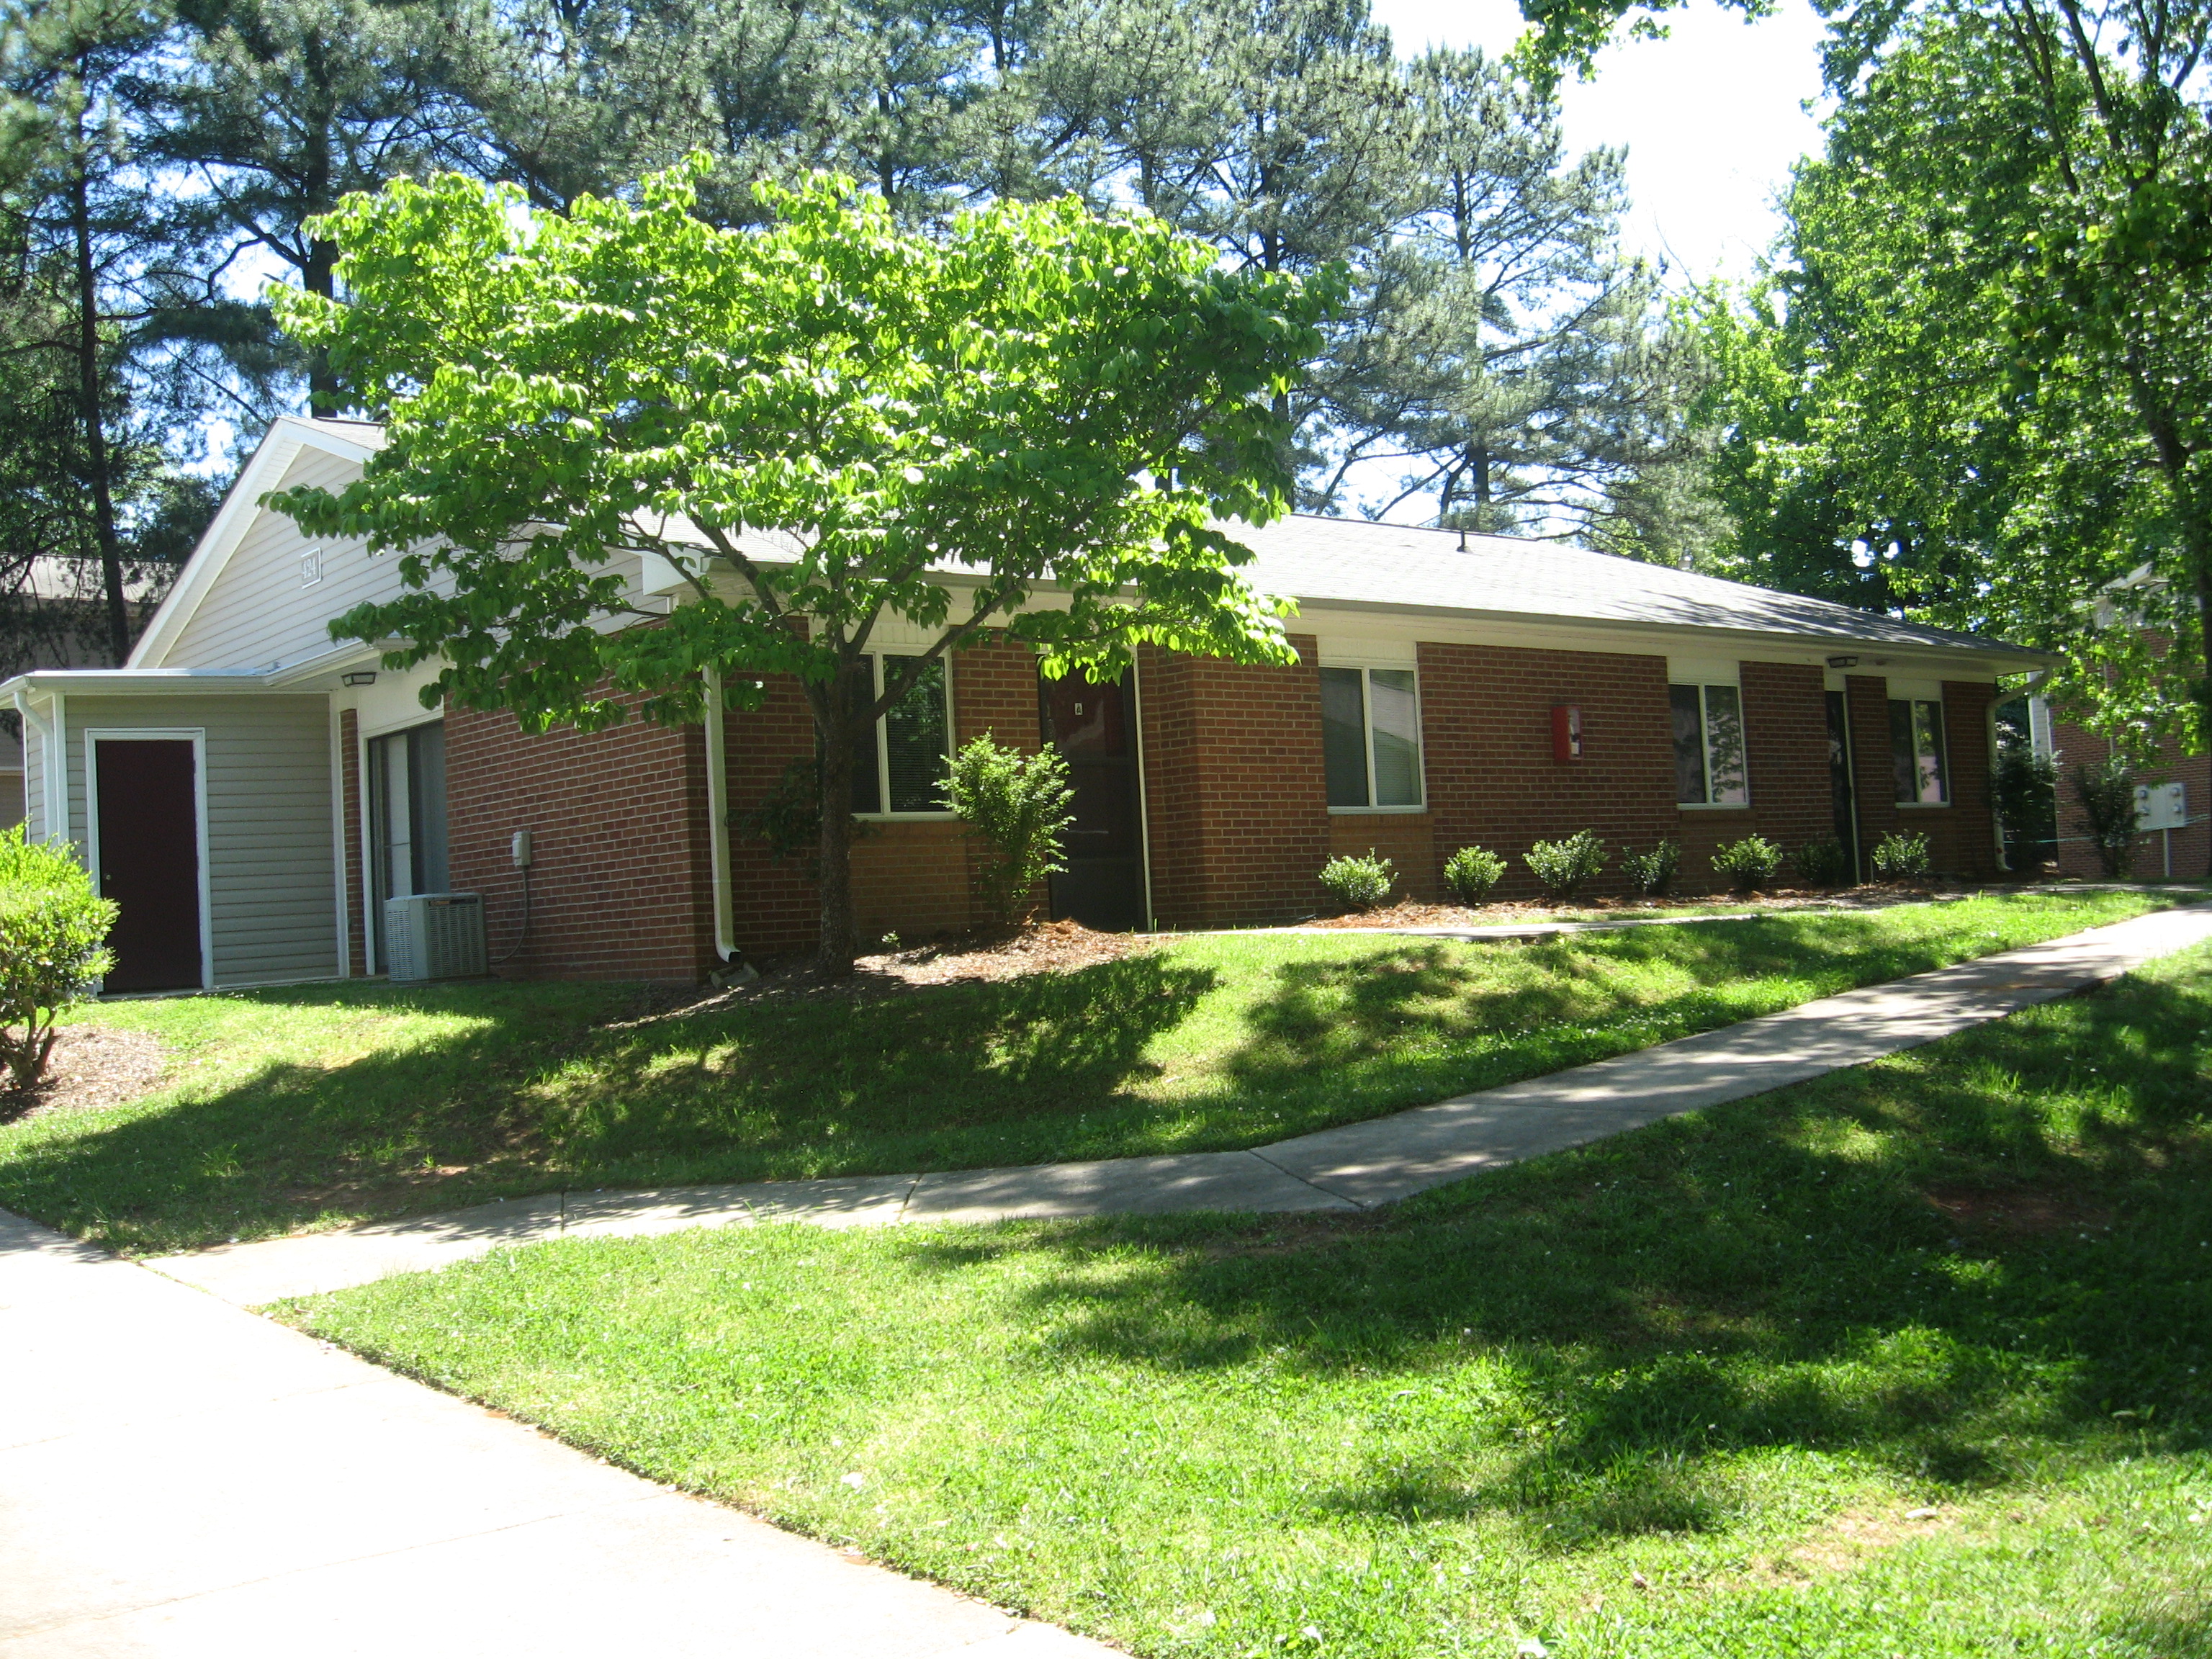 WESTVIEW VALLEY APARTMENTS